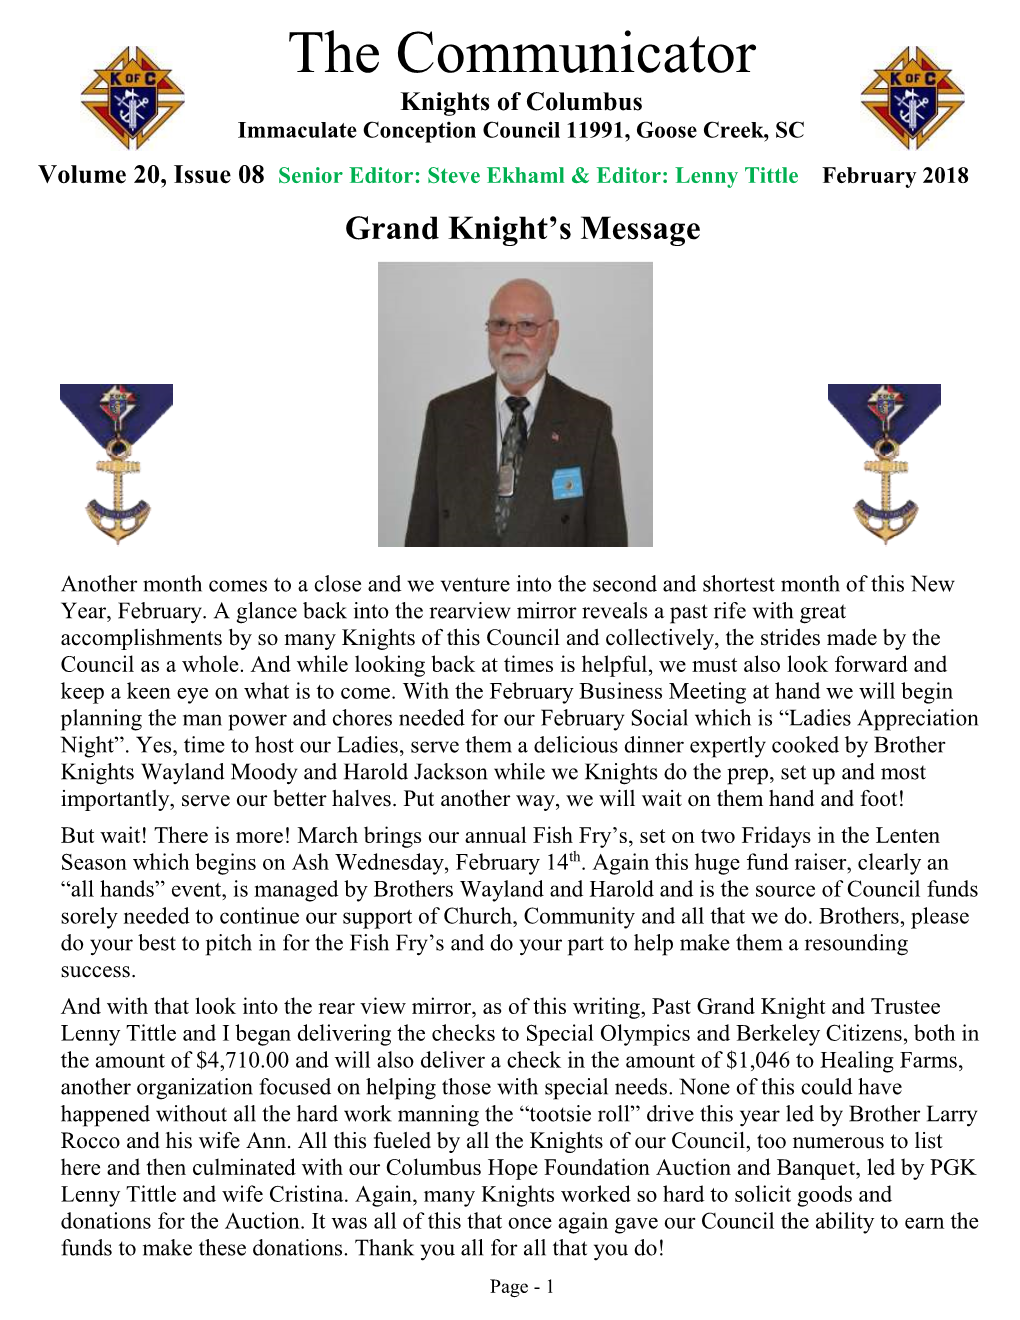 Lenny Tittle February 2018 Grand Knight's Message